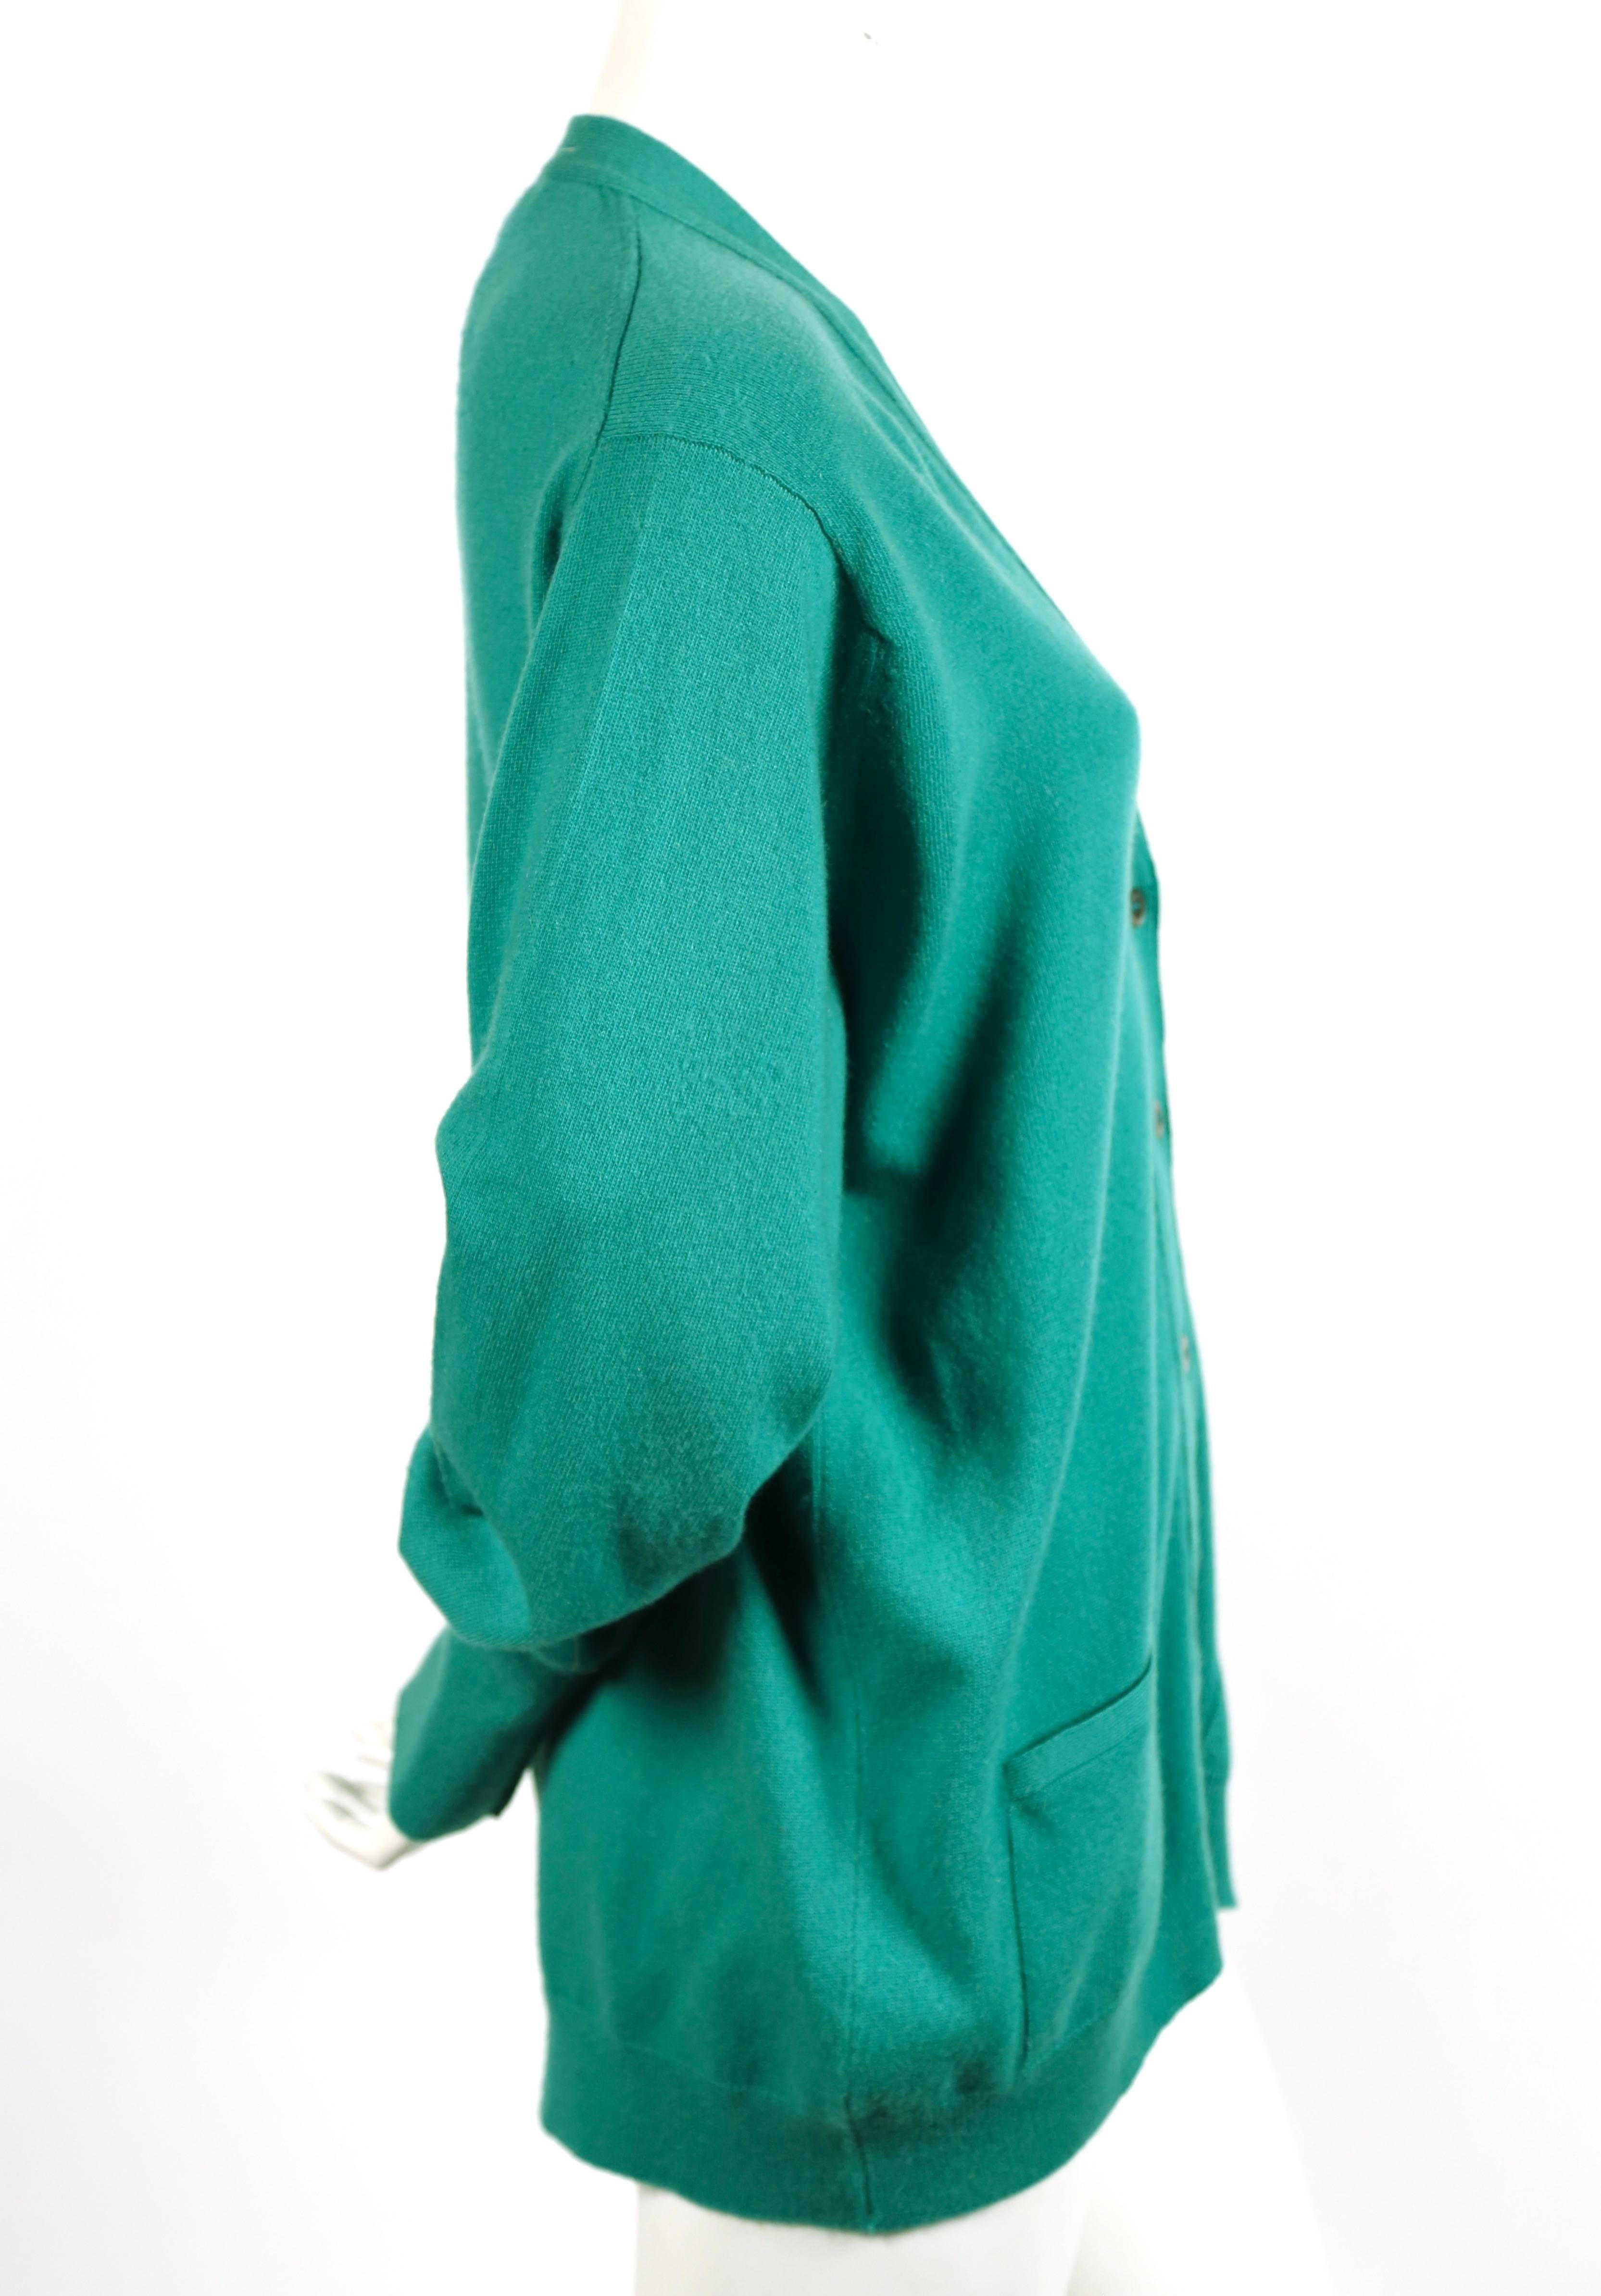 Green cashmere cardigan sweater designed by Hermes dating to the 1980's. Size 44. Approximate measurements: shoulder 22